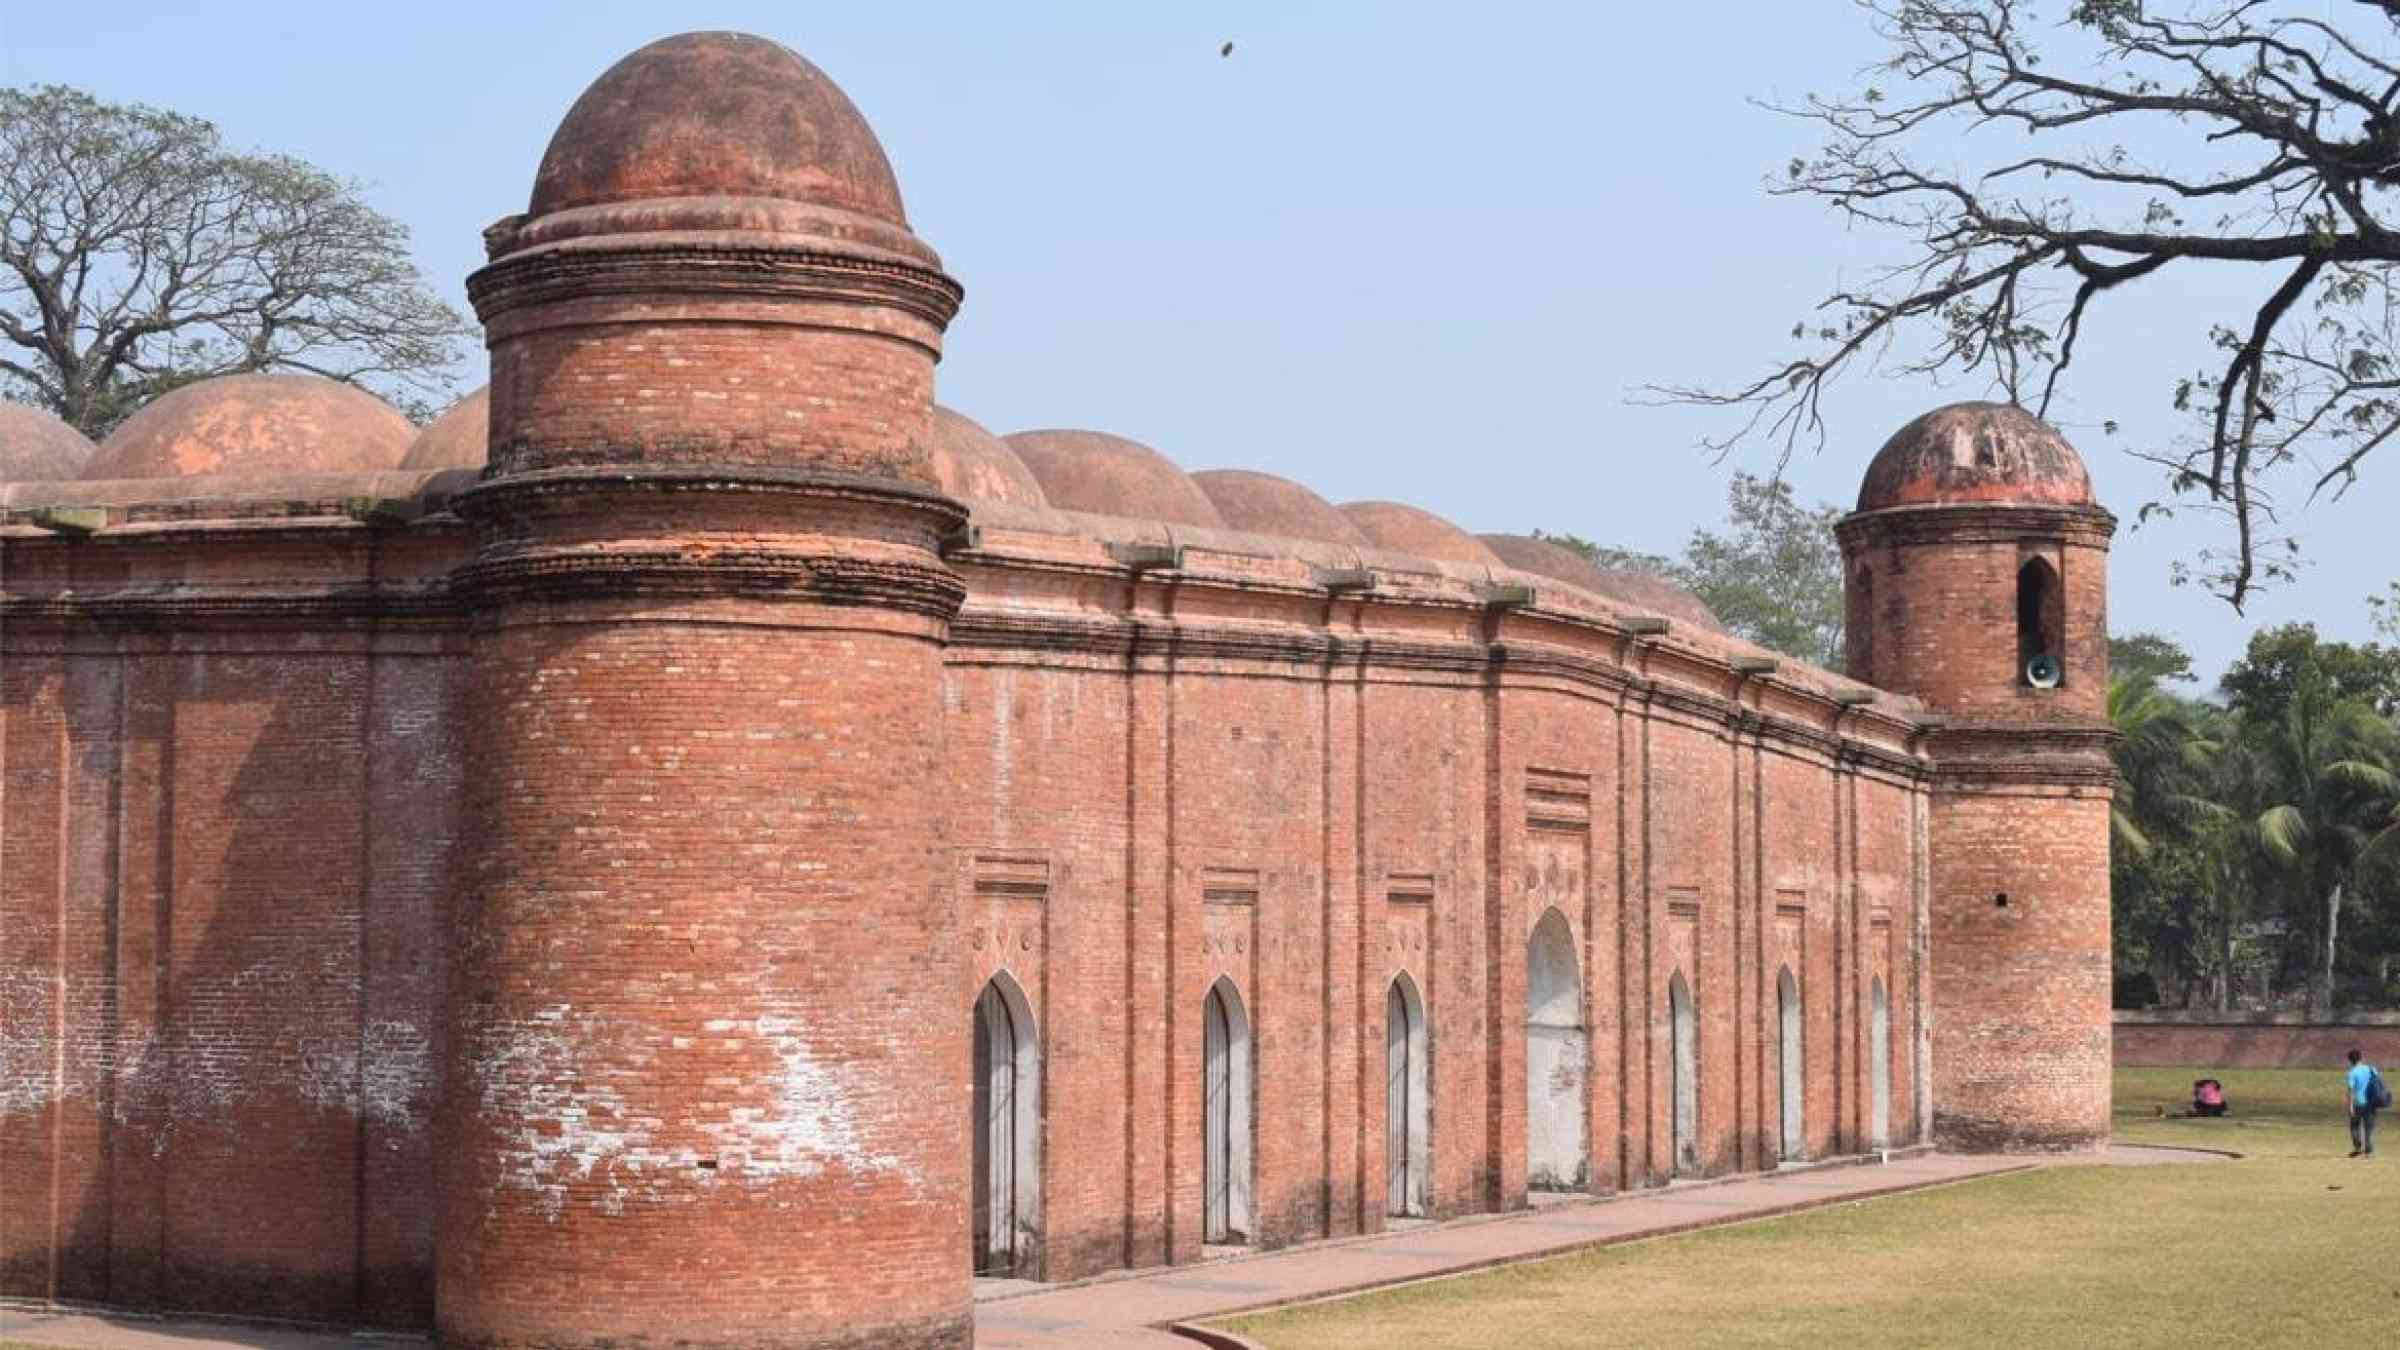 The walls of Bagerhat's sixty dome mosque are smudged white by the saline air